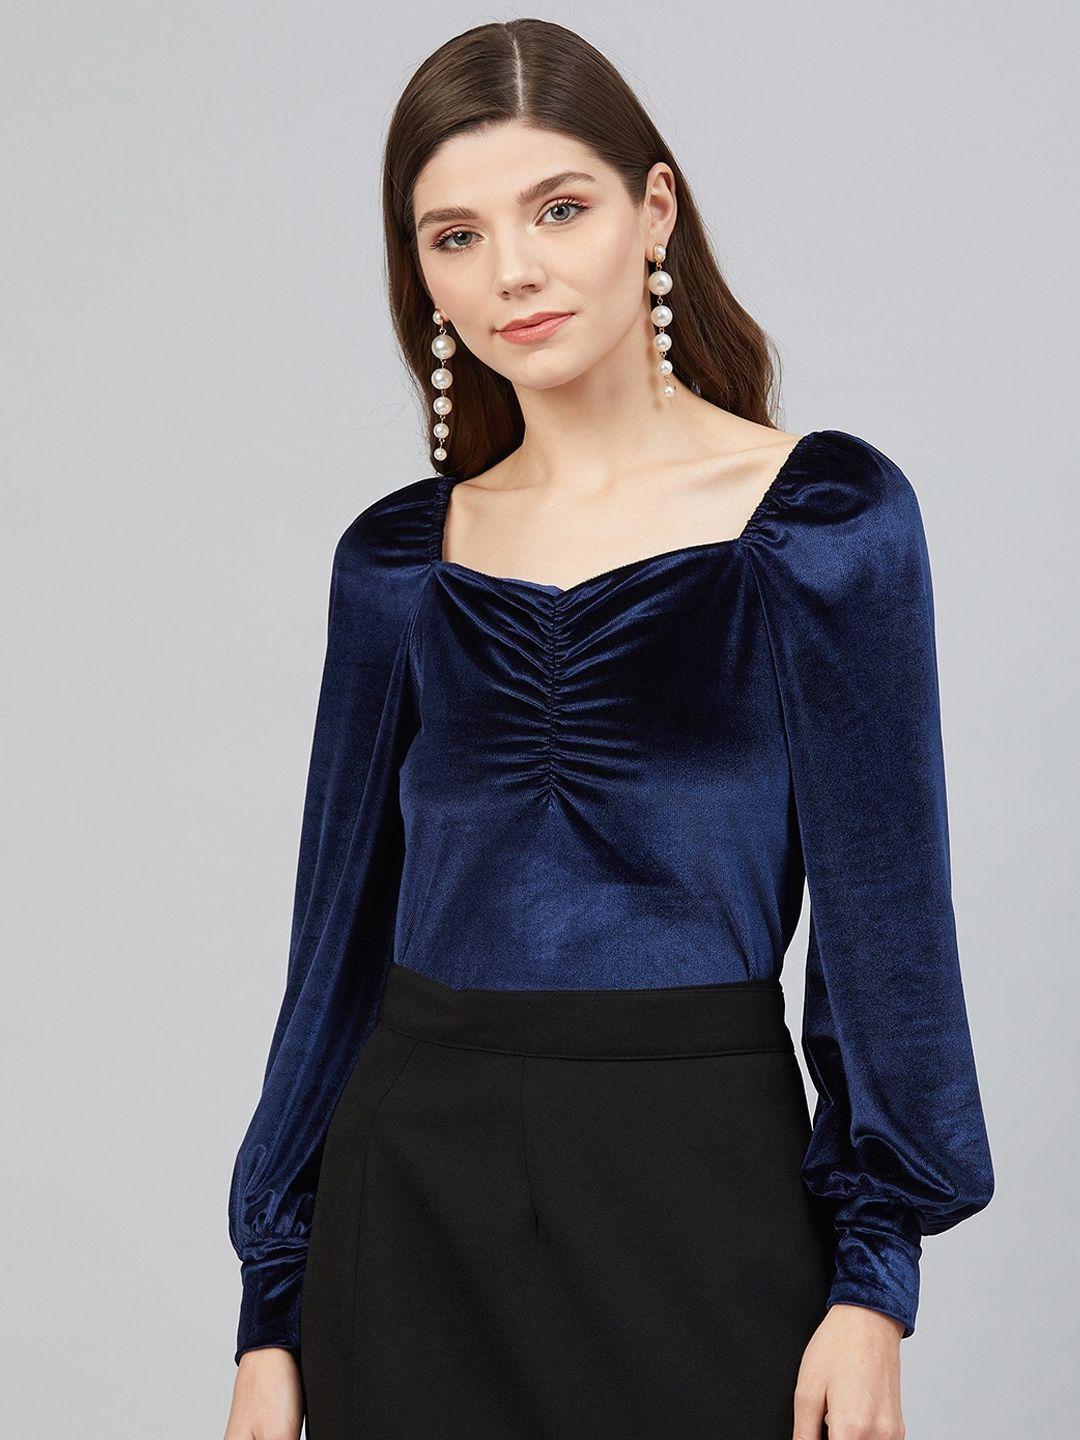 marie claire women navy blue solid top